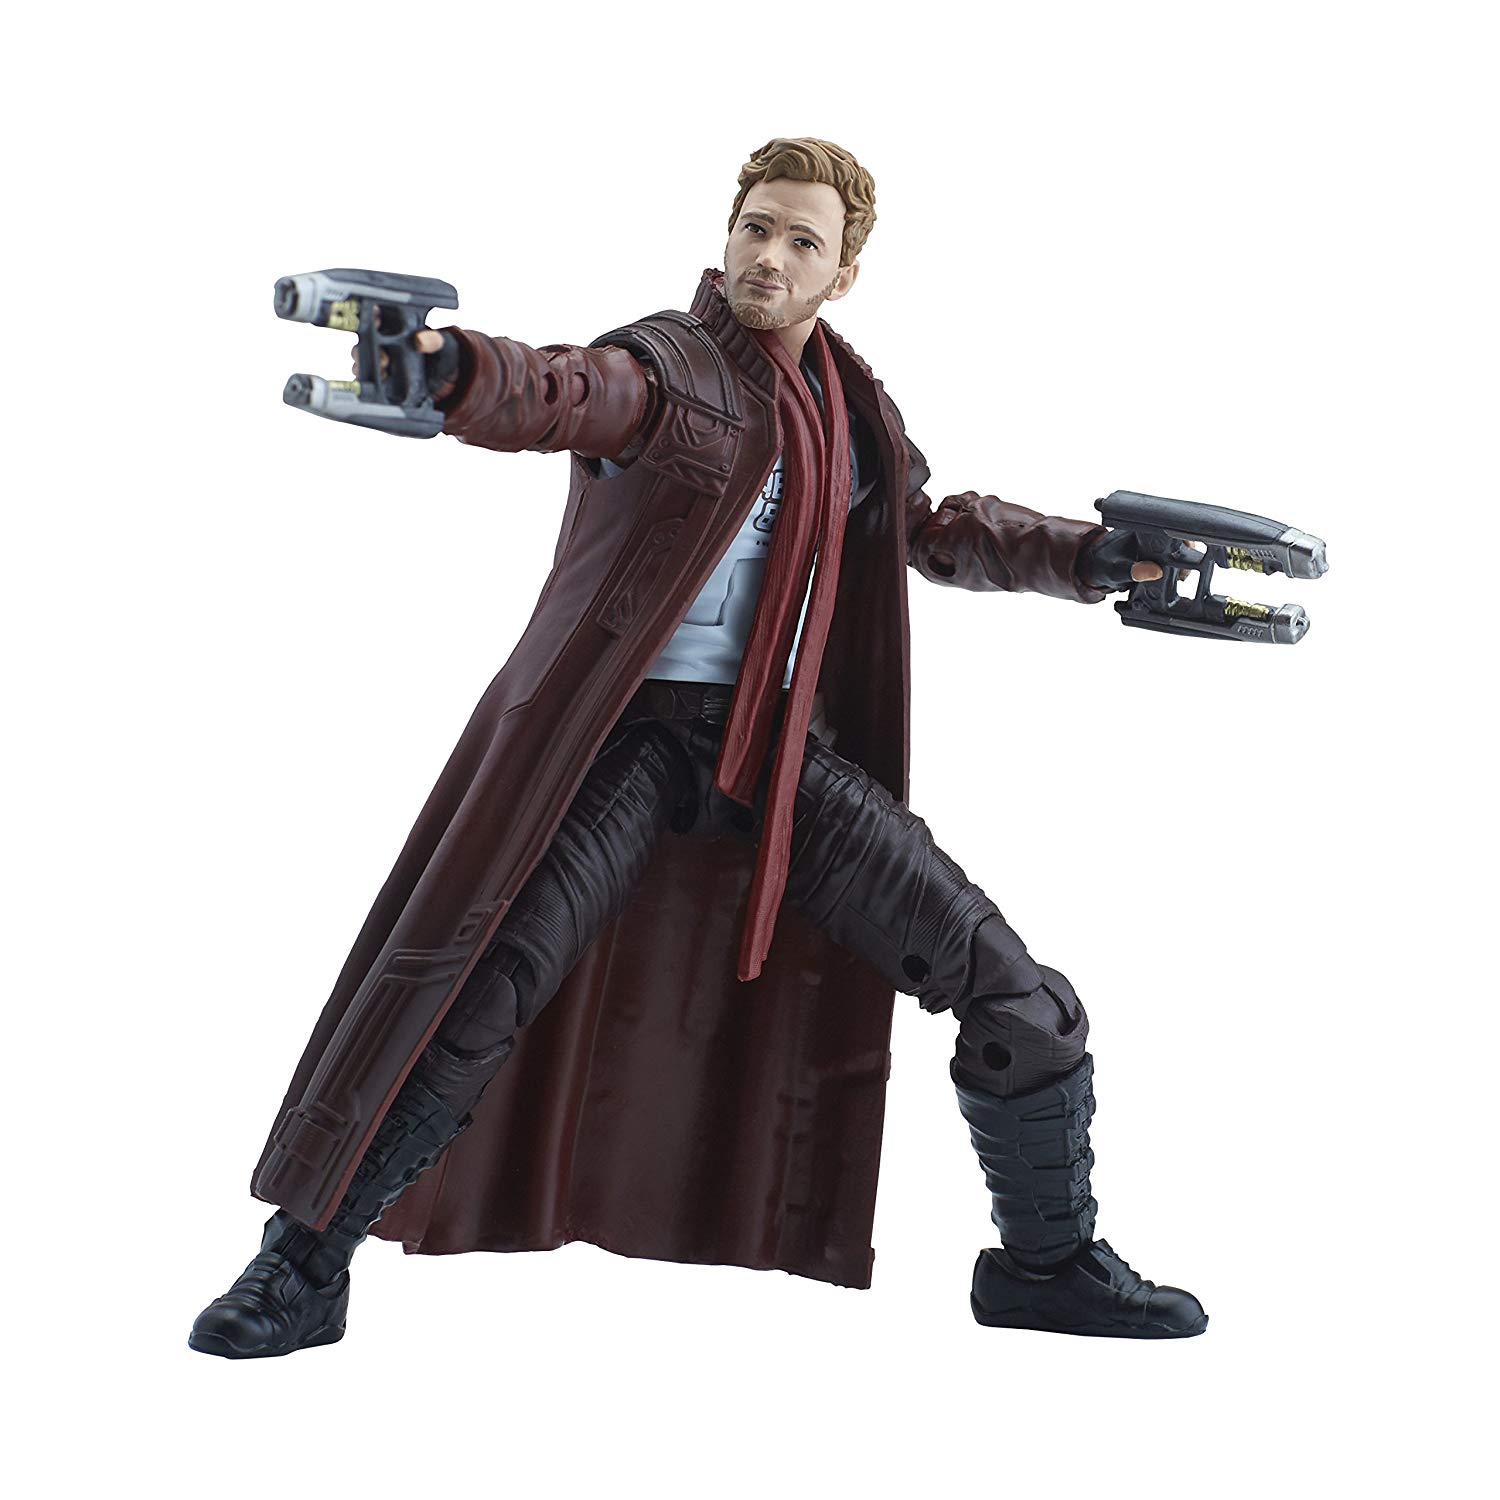 14 cm ACTIONFIGUR HASBRO MARVEL GUARDIANS OF THE GALAXY STAR-LORD 5" INCH ca 